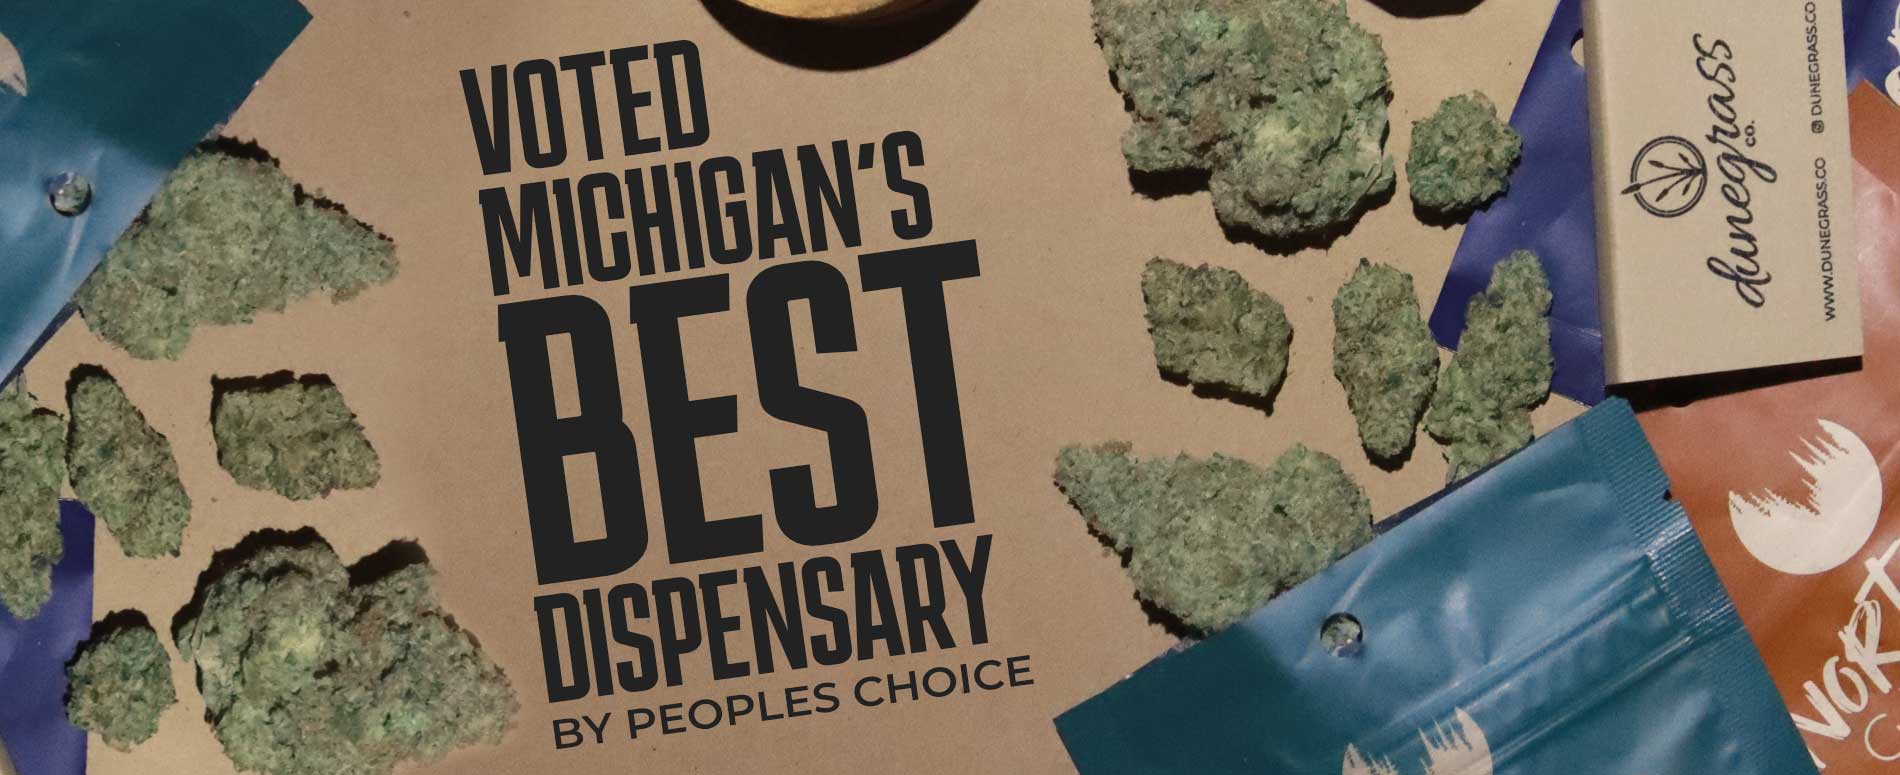 Voted Michigan's Best Dispensary By Peoples Choice